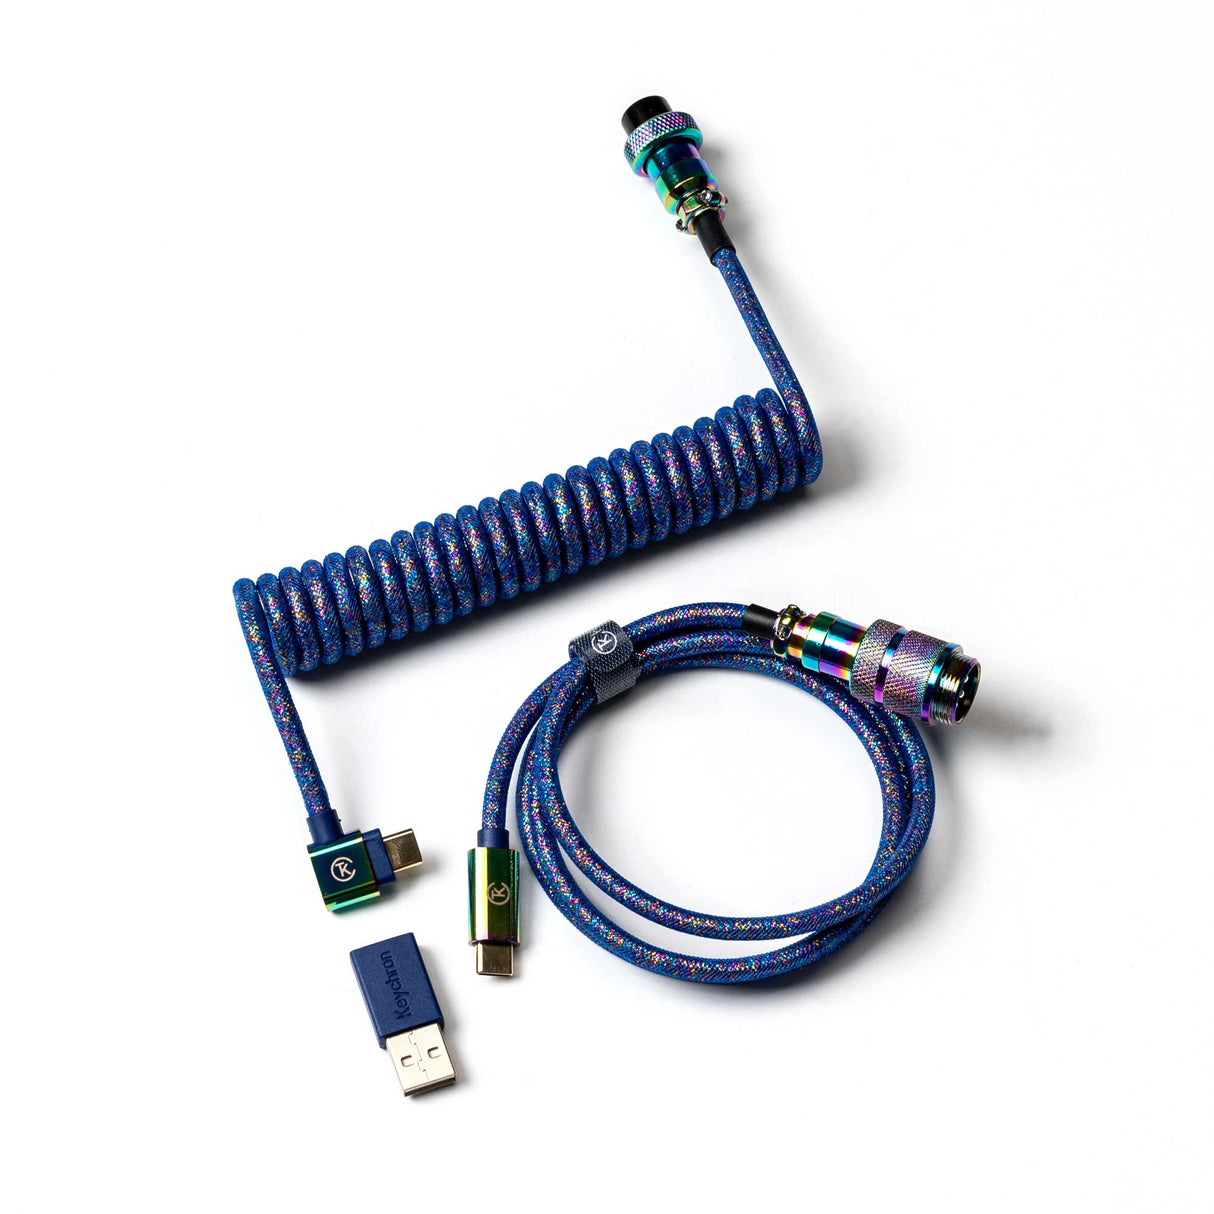 Keychron Coiled Aviator Cable – Keychron  Mechanical Keyboards for Mac,  Windows and Android